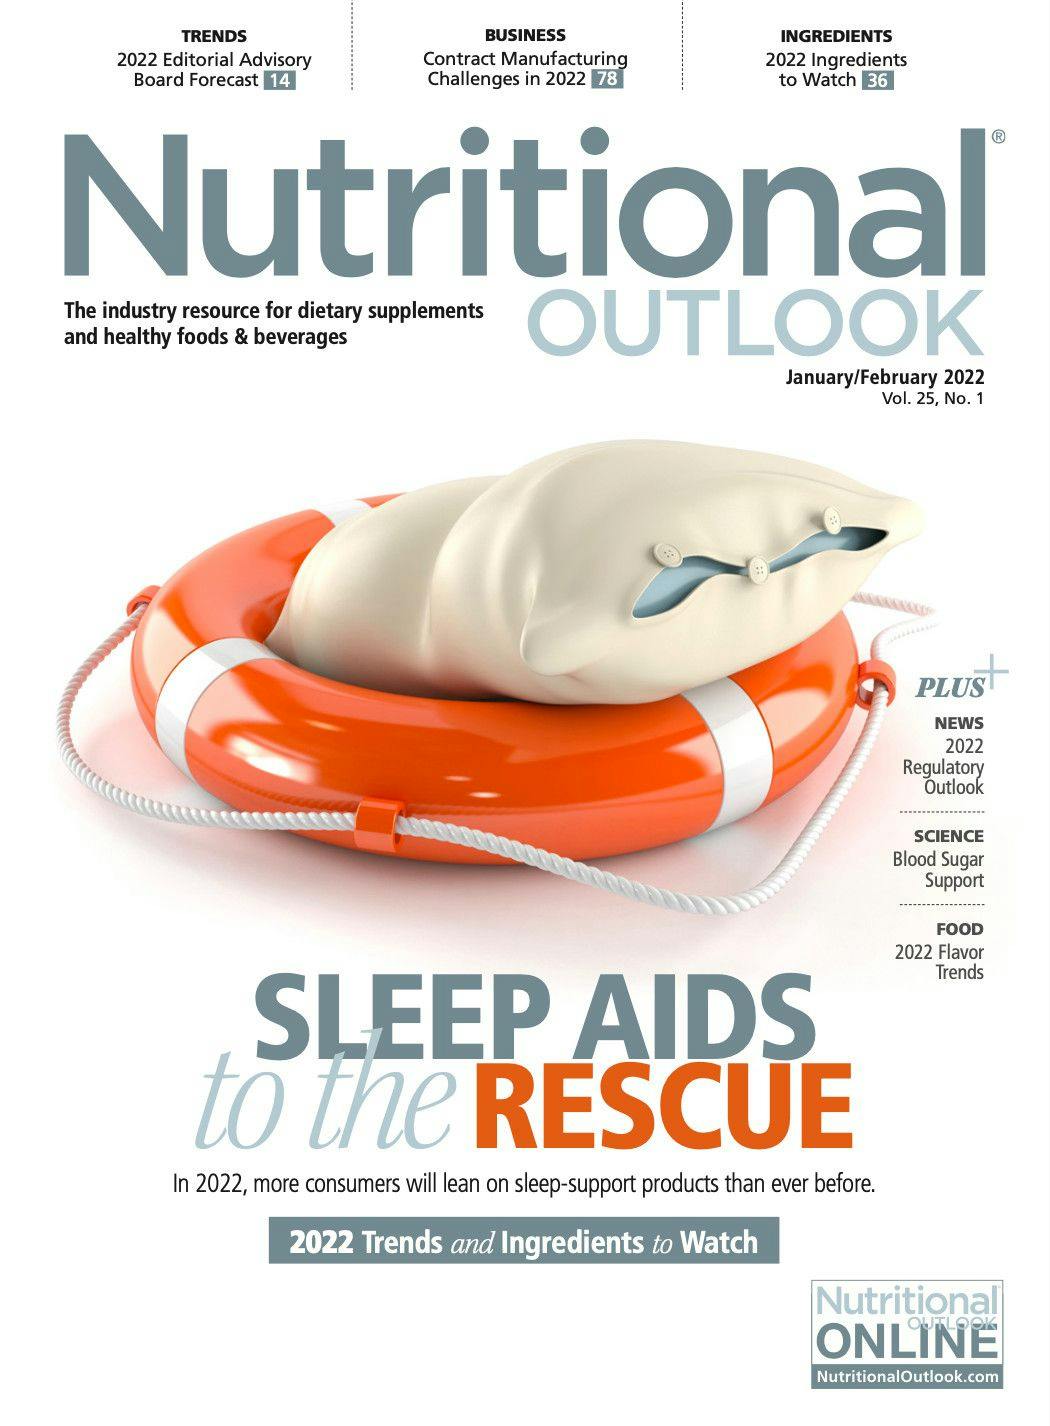 Nutritional Outlook Vol. 25 No. 1